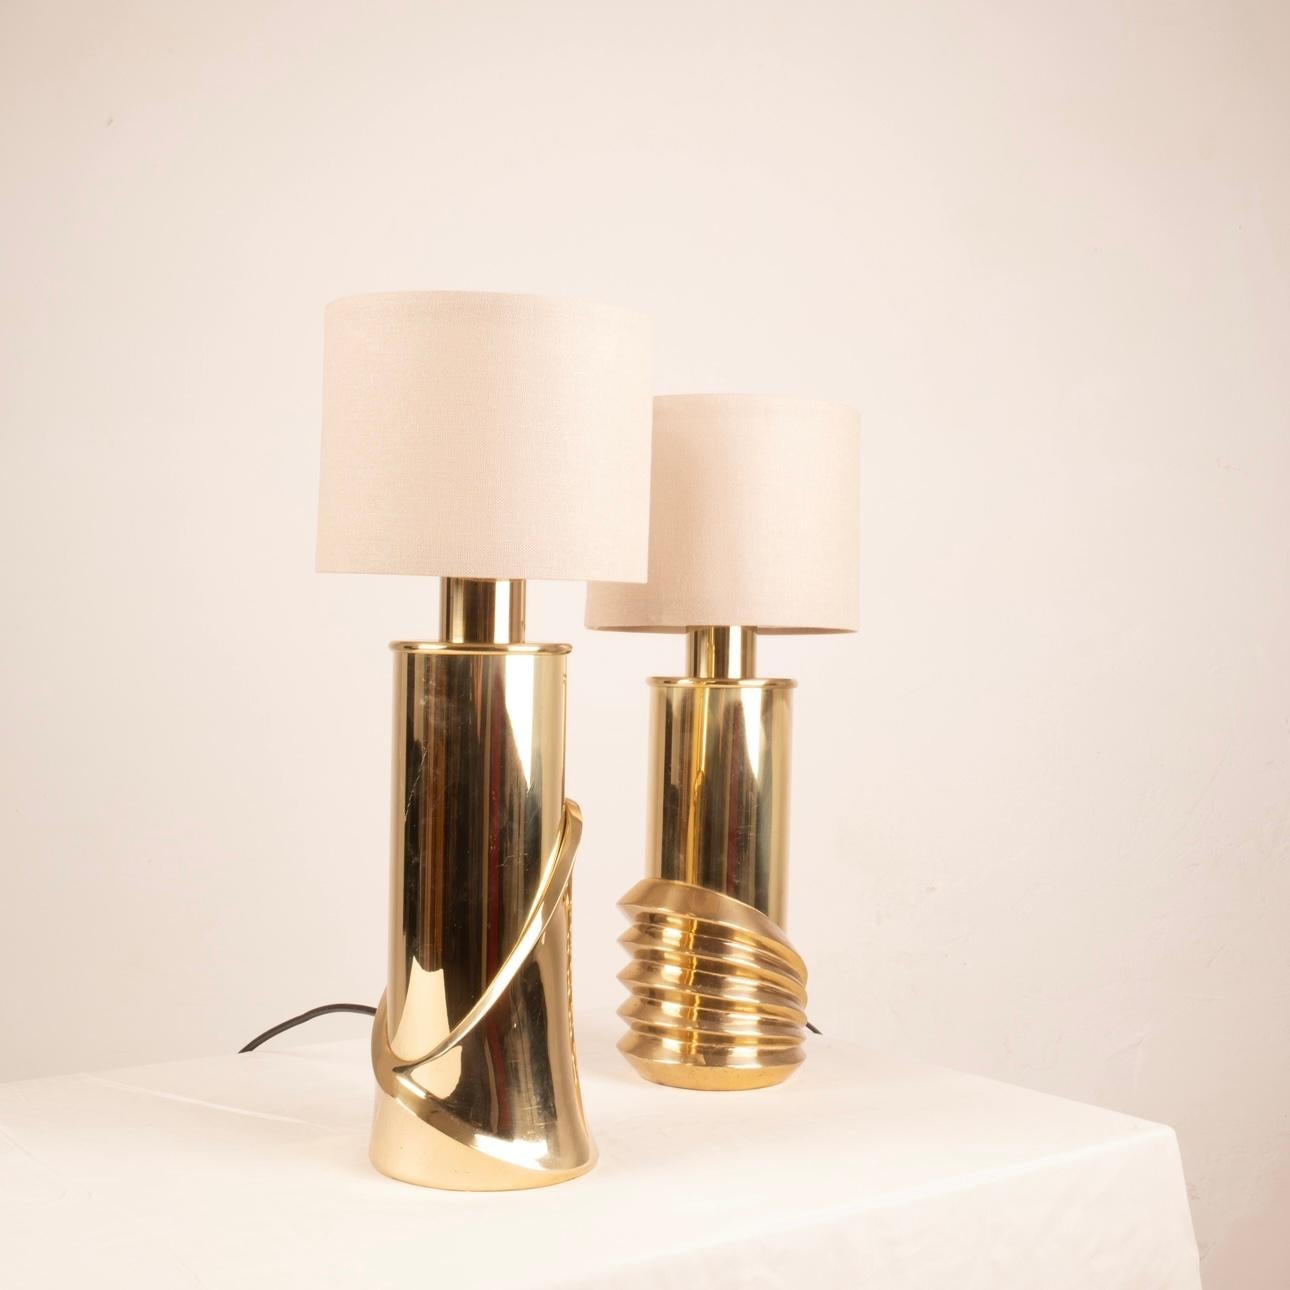 Pair of Brass Lamps by Luciano Frigerio for Frigerio of Desio For Sale 6